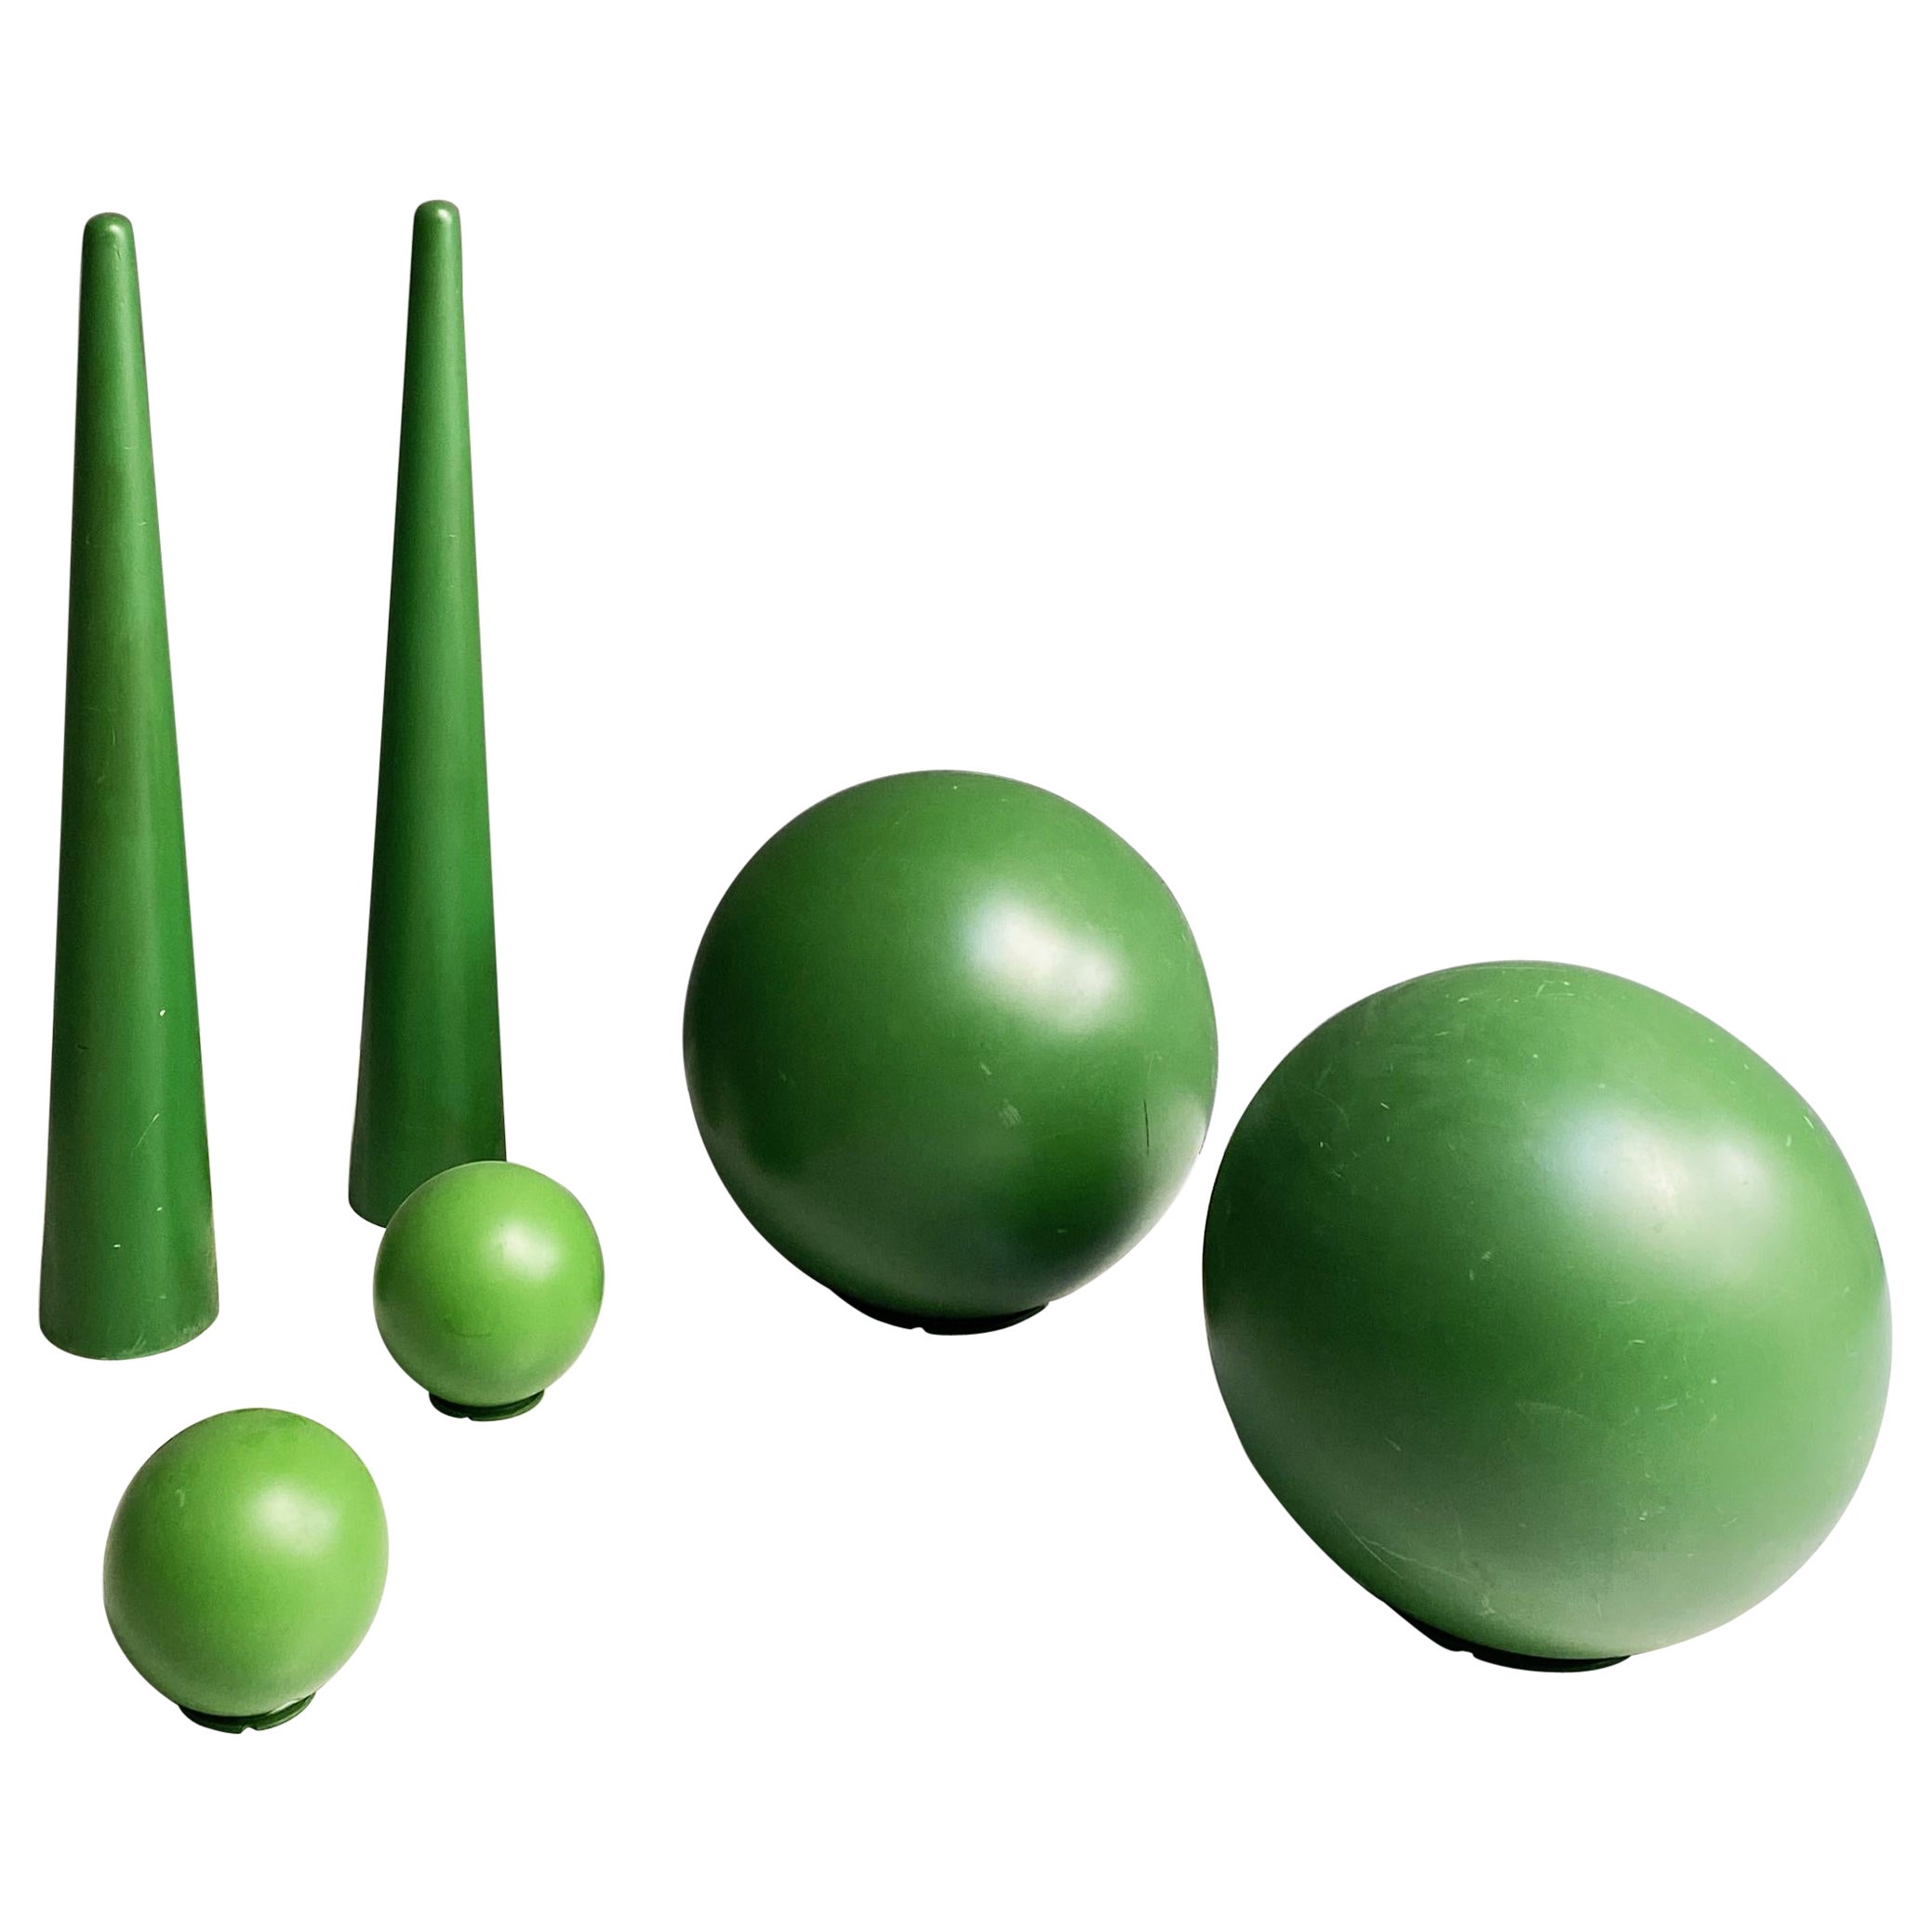 Italian Modern Green Plastic Props for Scenography, 1990s For Sale